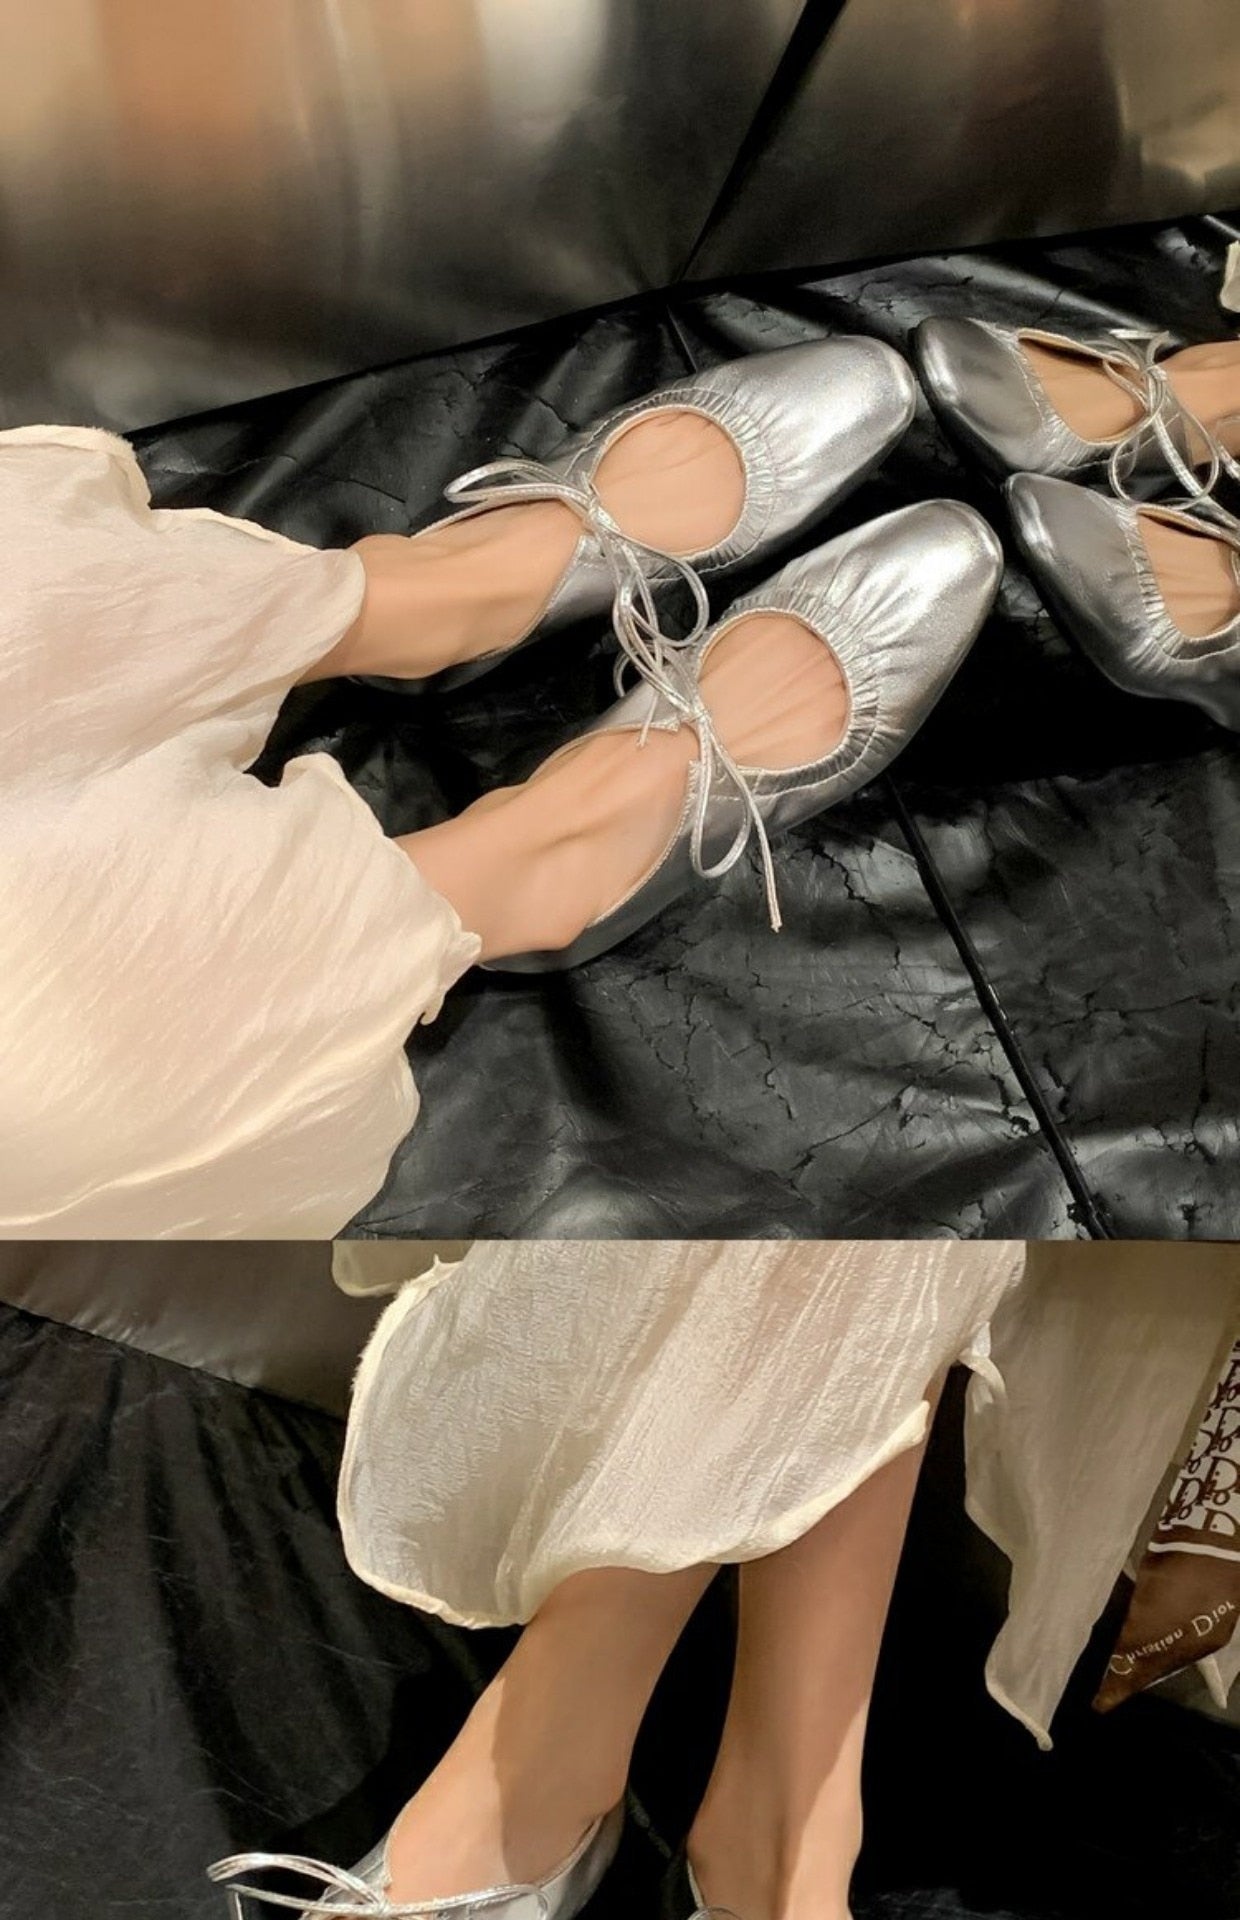 Silver Leather Ballet Flats